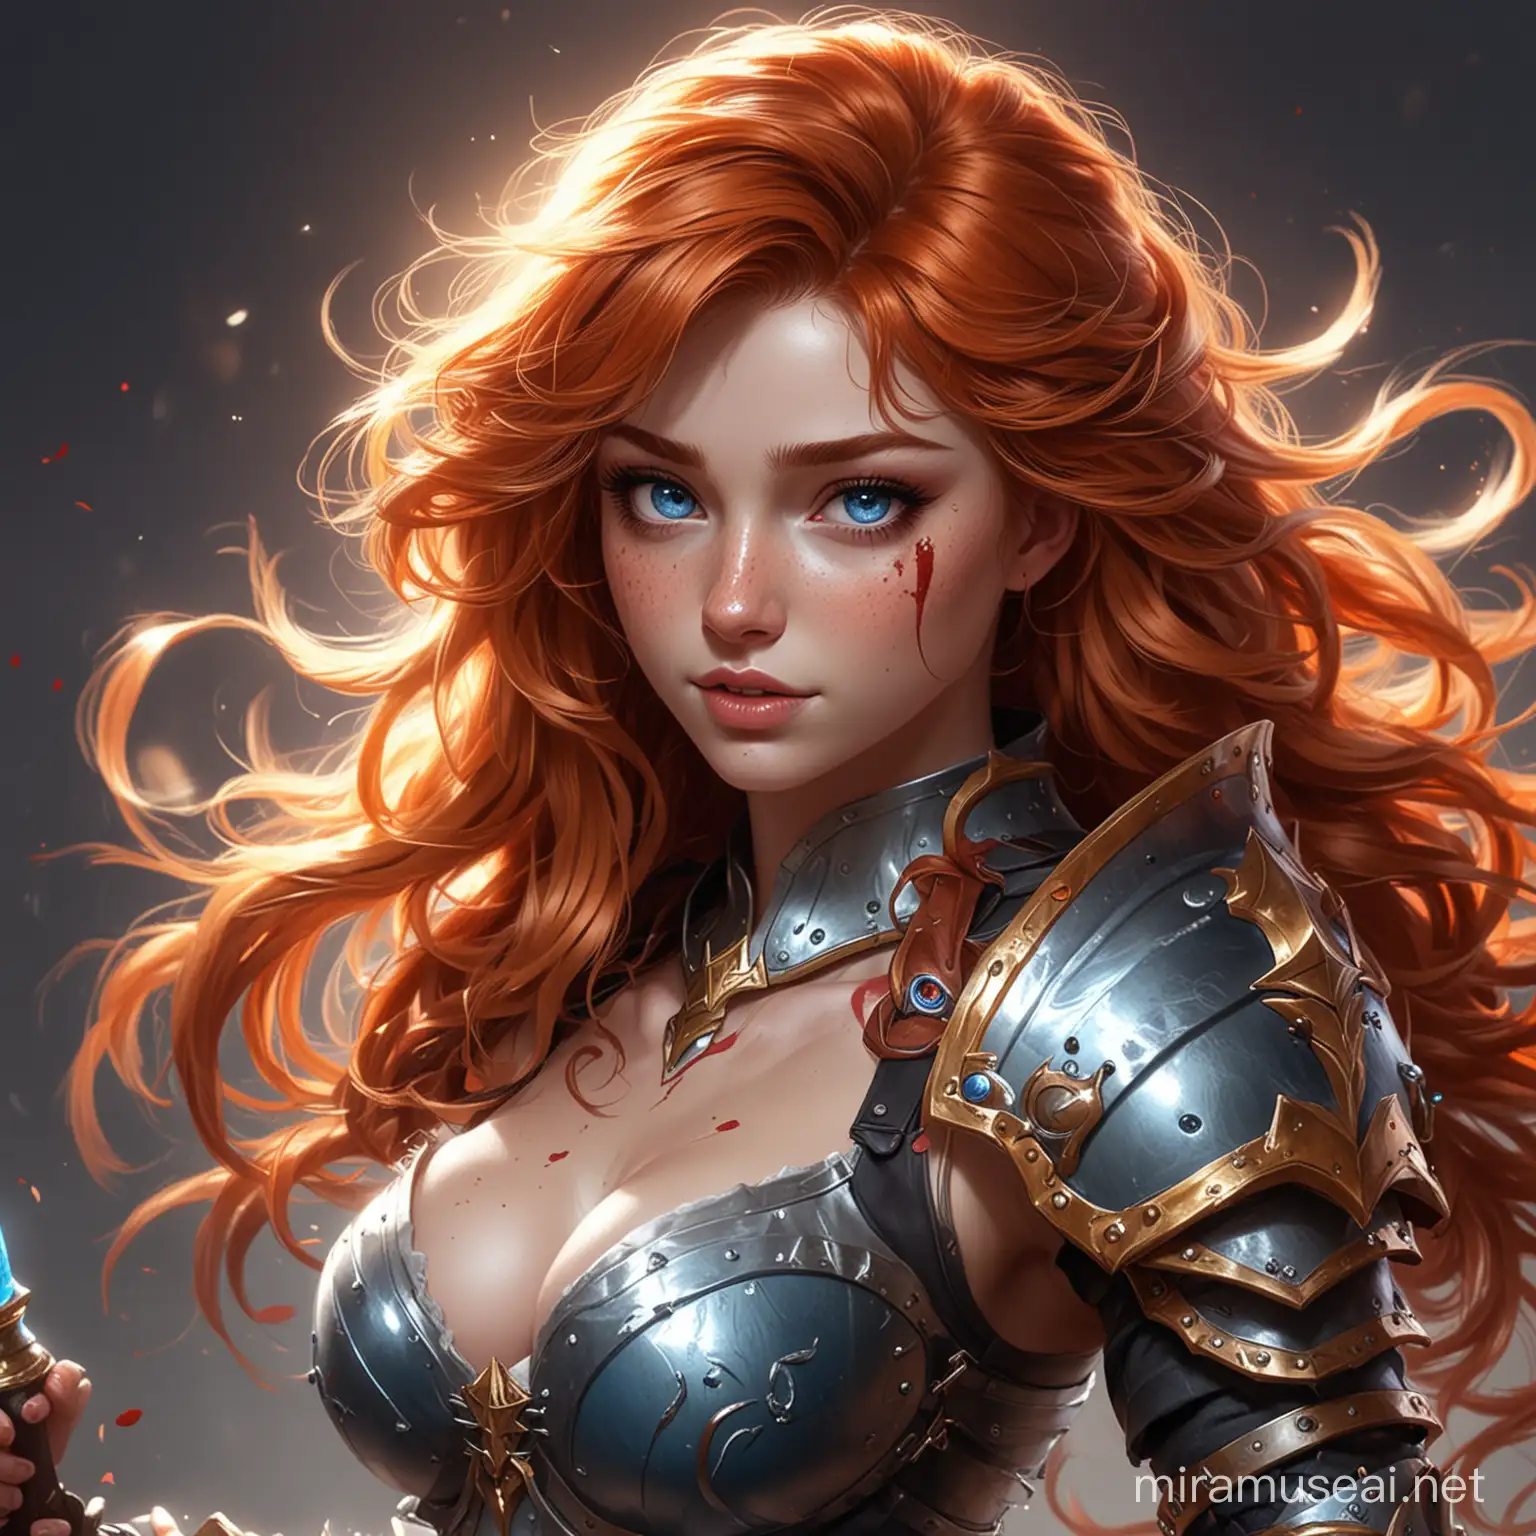 Draw a sexy warrior League of Legends character with ginger wavy hairs, blue eyes, freckles on her cheeks, a lot of bloody scratchs on her face, wears an armor, has thin and long legs and she holds a light ball in her hand